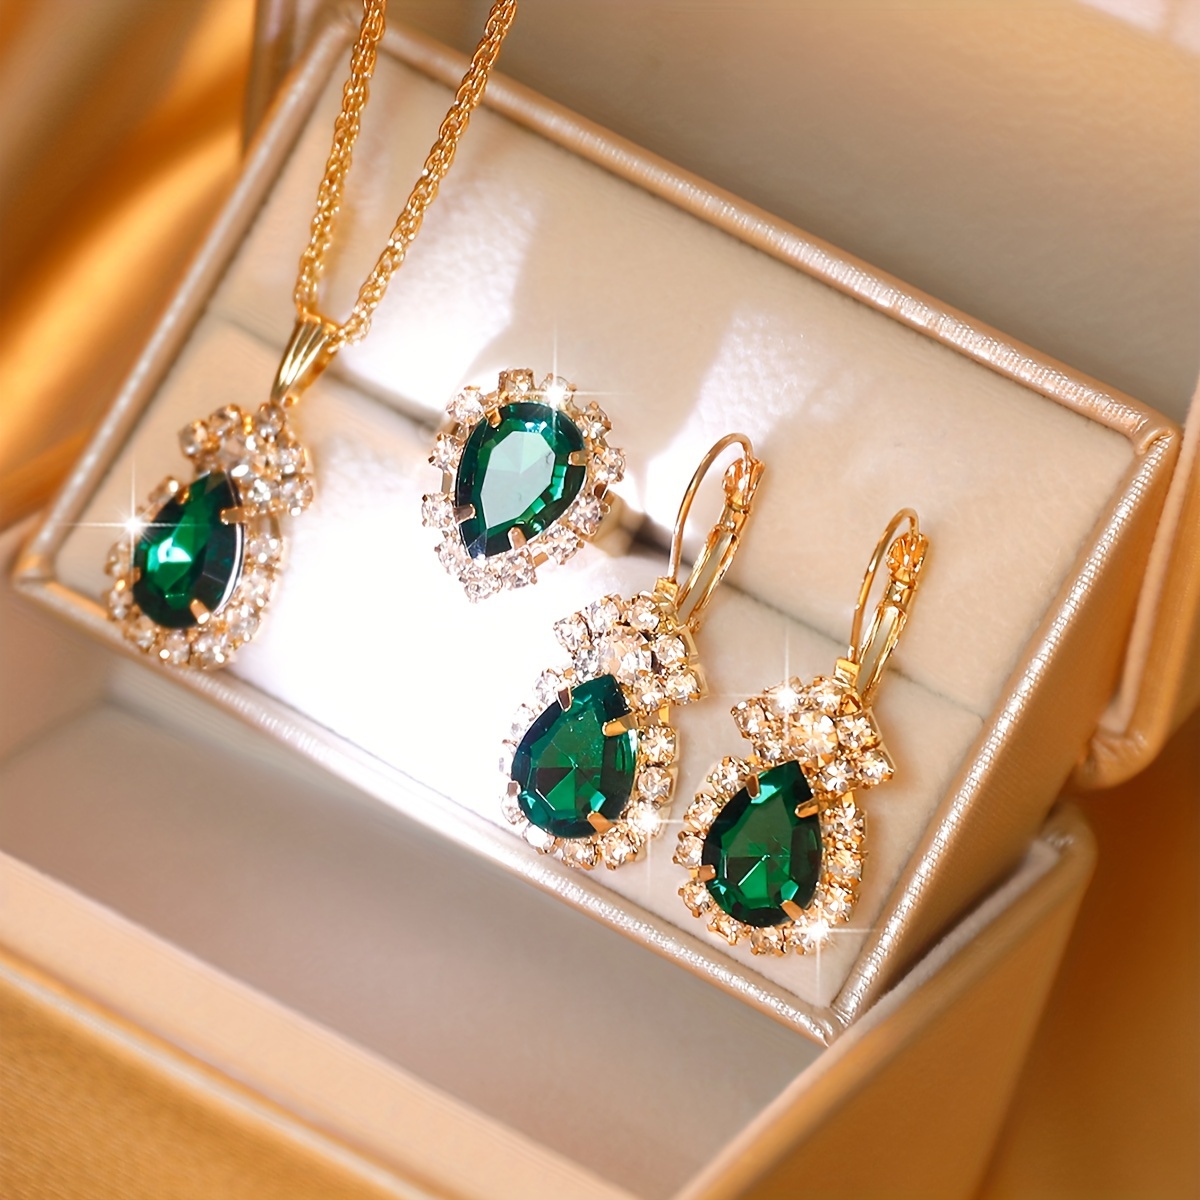 

Droplet Shaped Emerald Rhinestone Pendant, Alloy Jewelry Set, Minimalist, Elegant Style For Fashion-conscious Women, Including Necklace Earrings & Ring Female Gift